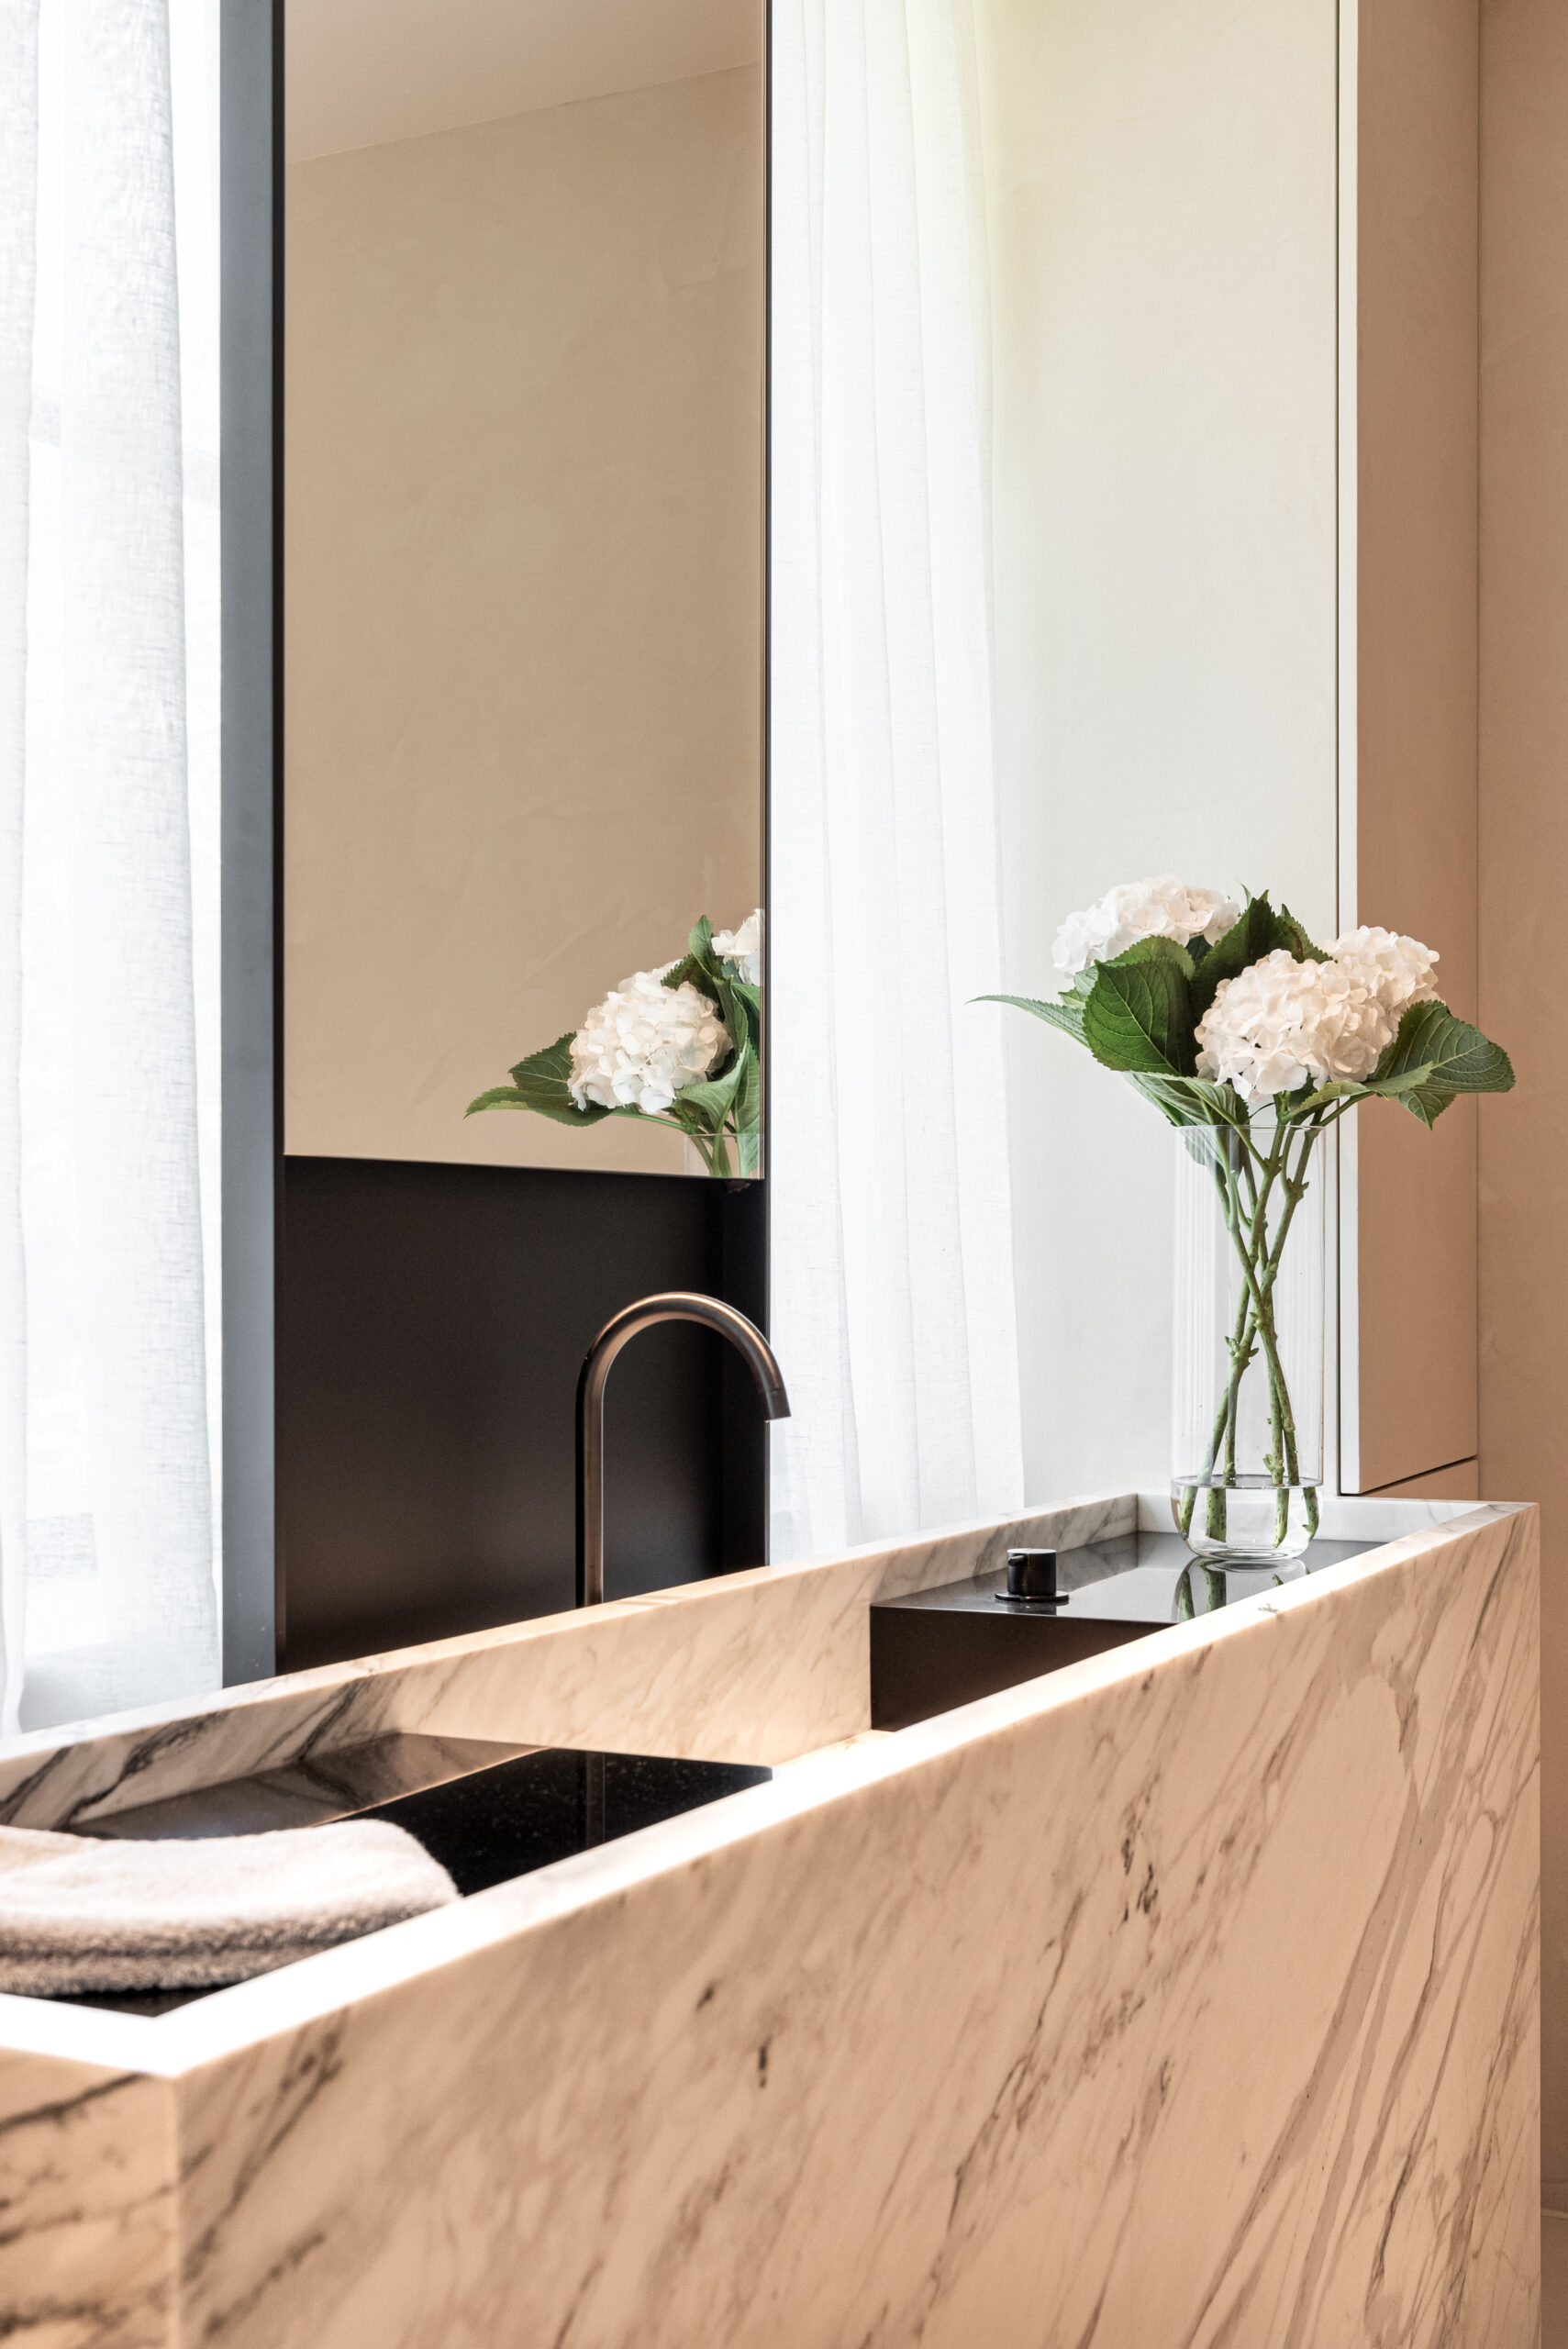 A marble sink complements a vase of fresh hydrangeas in a tranquil bathroom setting.